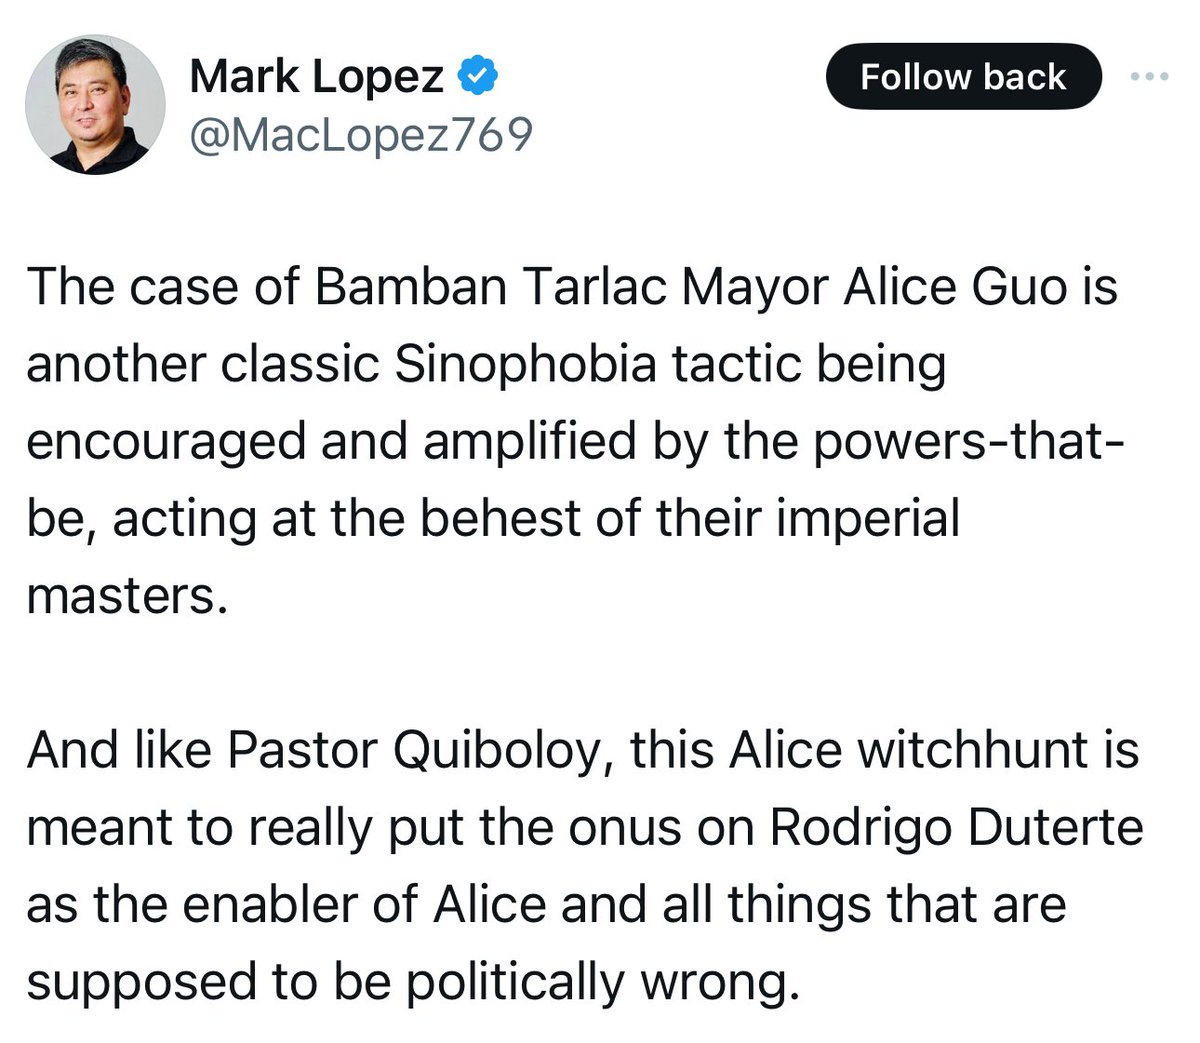 Suprisingly, those who remain silent about China's illegal actions while criticizing the government's efforts to expose China's aggressive behavior all seem to have one thing in common: they are all defenders of Apolo Quiboloy and Bamban Mayor Alice Guo. This observation raises